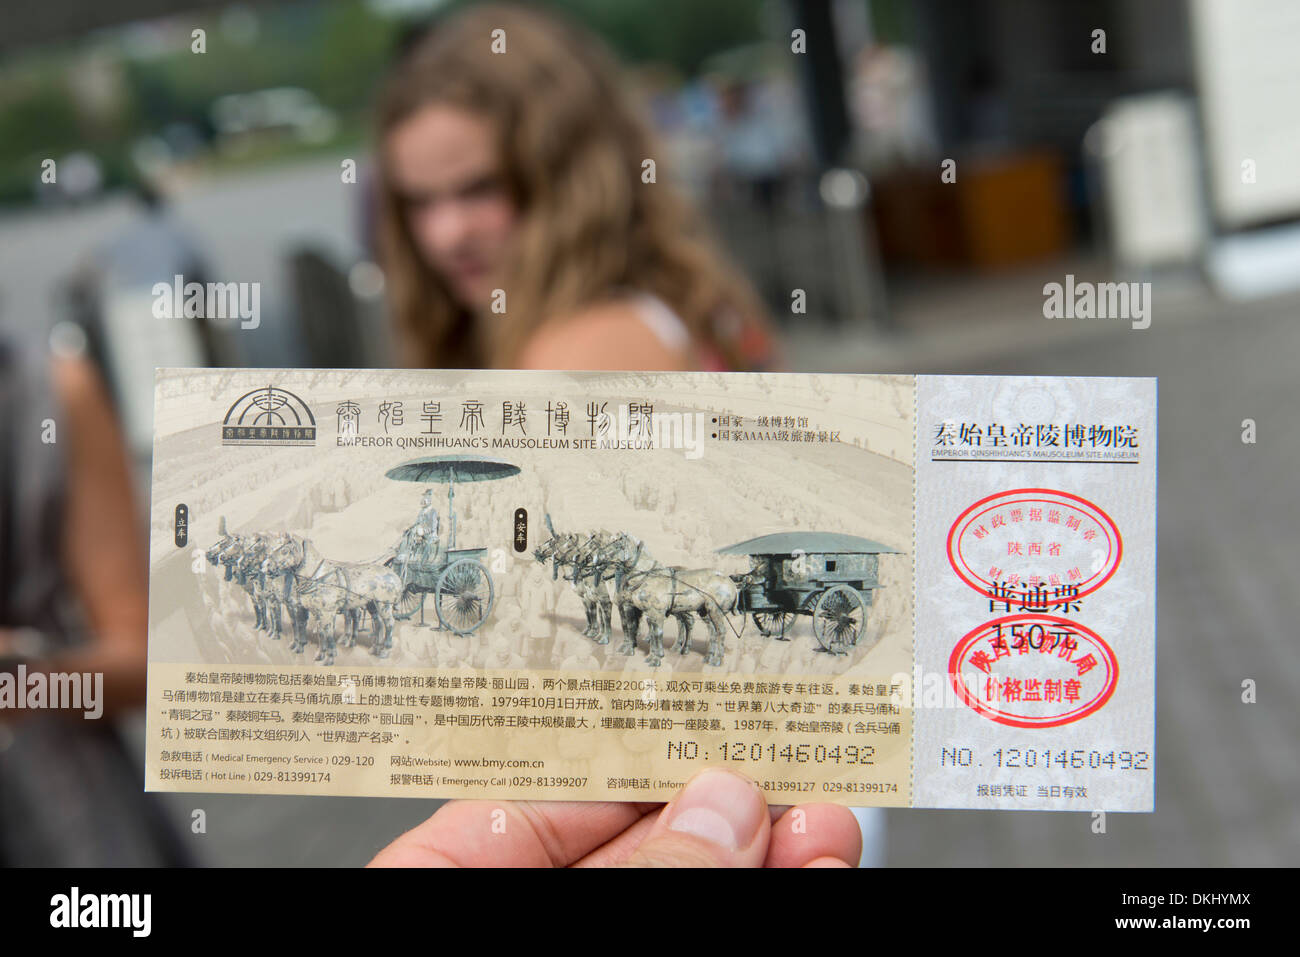 Tourist holding the entry pass of Emperor Qin Shin Huang's Mausoleum site Museum, Xi'an, Shaanxi, China. Stock Photo